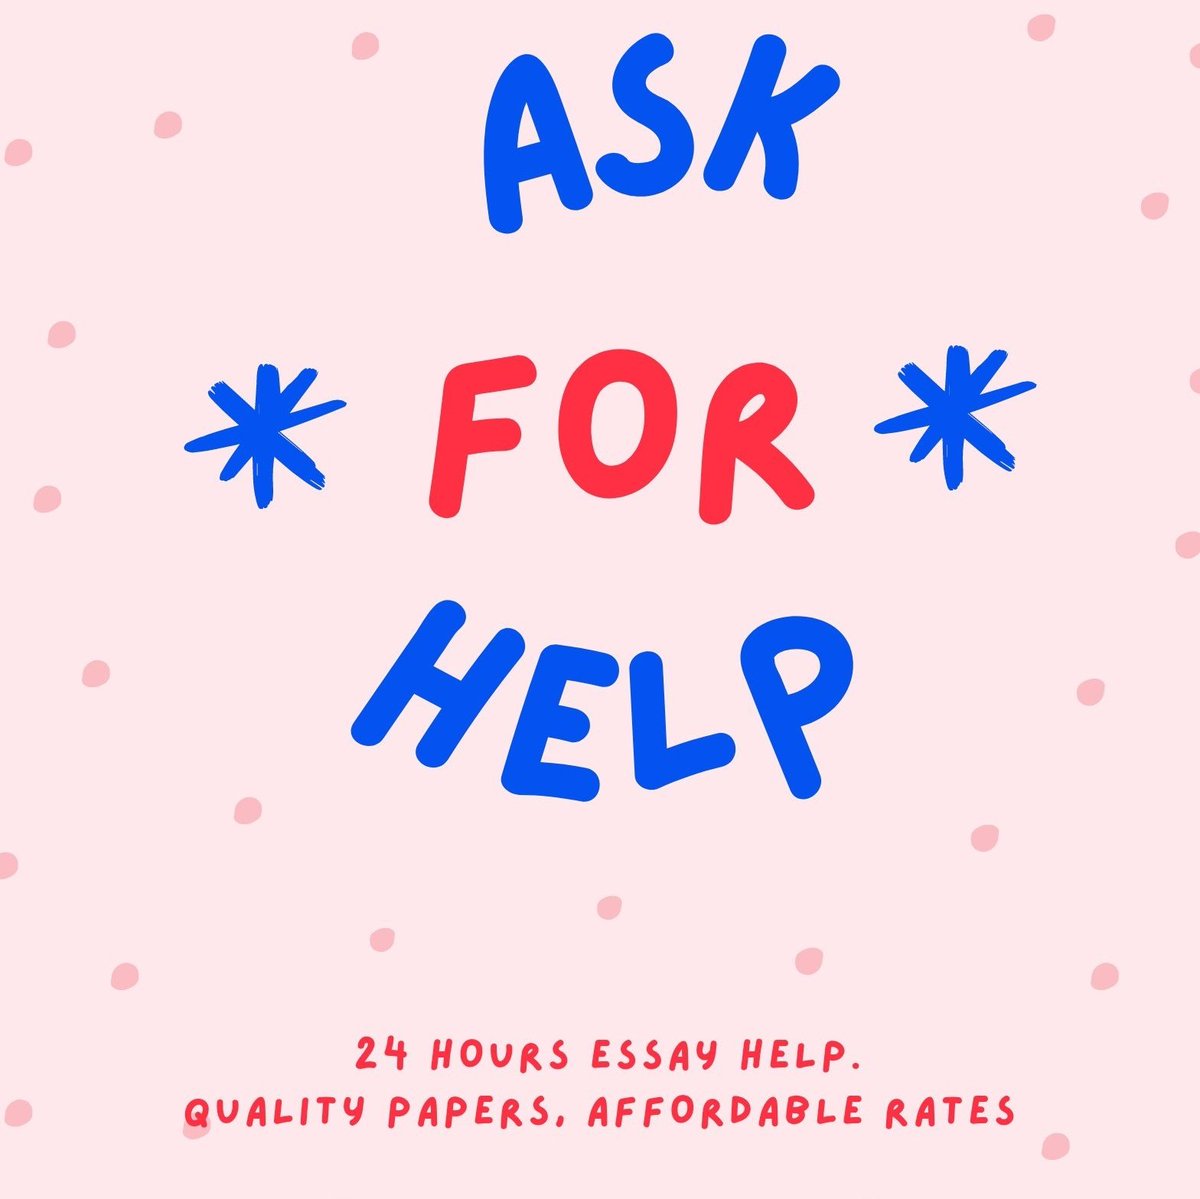 Do you have an assignment or essay due this week? Hmu for top-grade services 
#essaypay 
✓Sociology , , 
✓ English
✓Health
✓Business 
✓Psychology
✓Markerting
✓Management
✓Psychology
#Summersemester